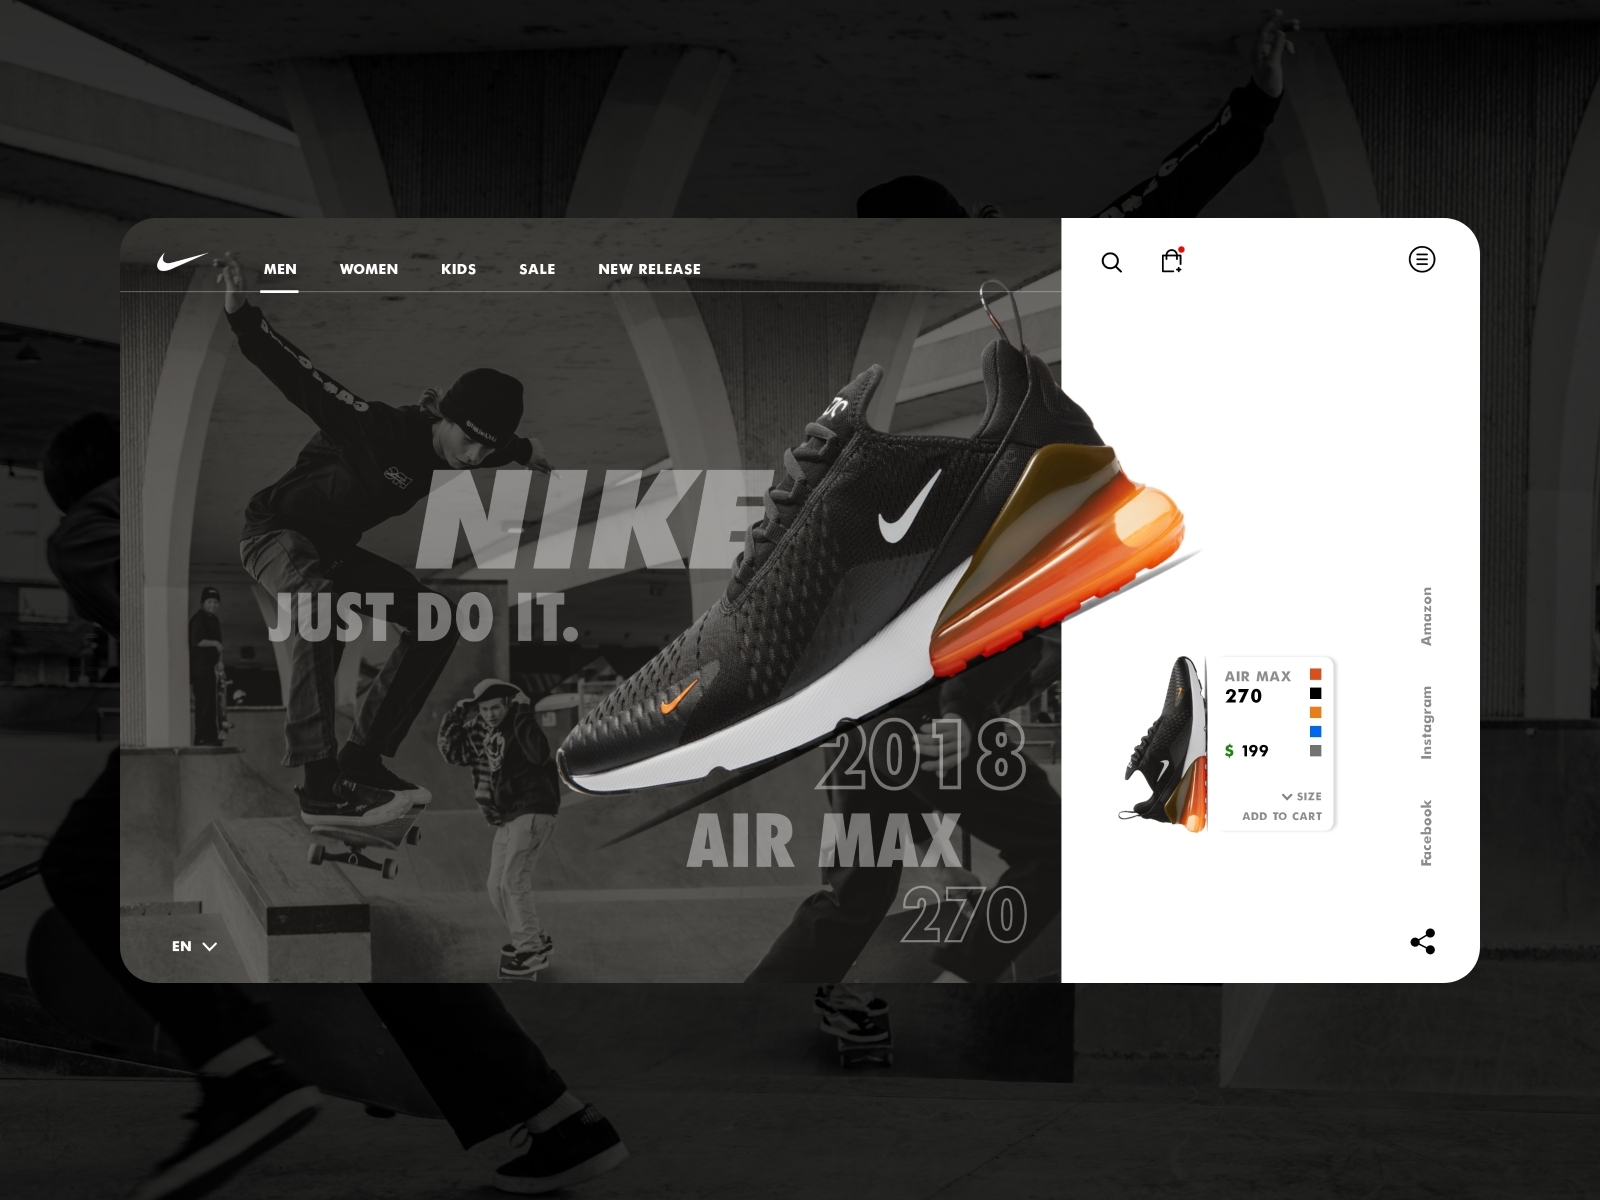 NIKE Web Store Concept Design by Omer Farooq on Dribbble